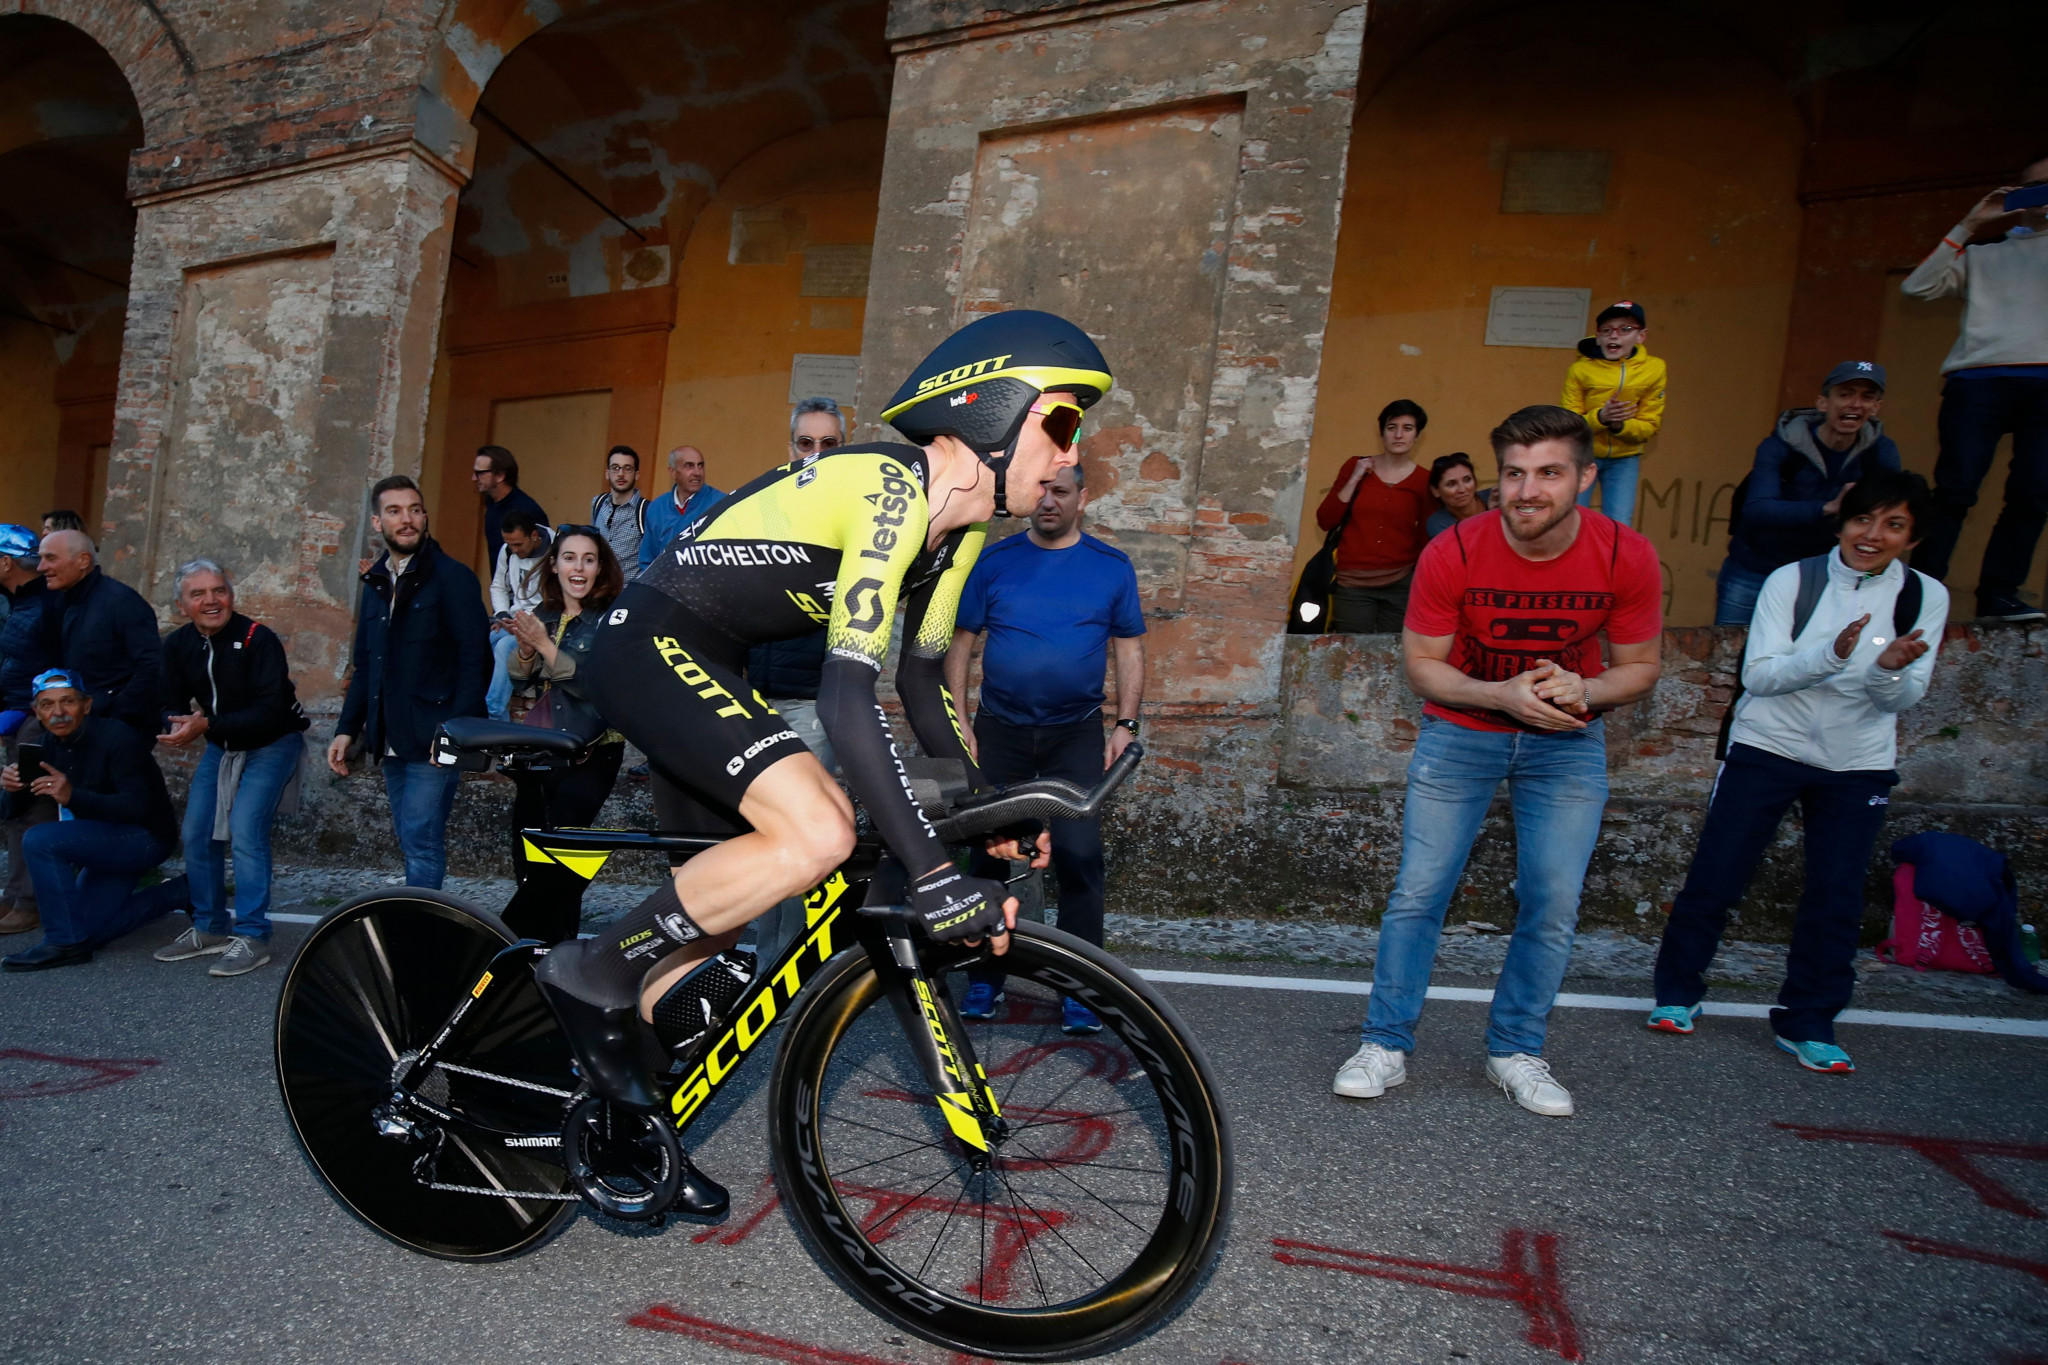 Britain's Simon Yates finished second in the opening stage of the Giro d'Italia ©Getty Images